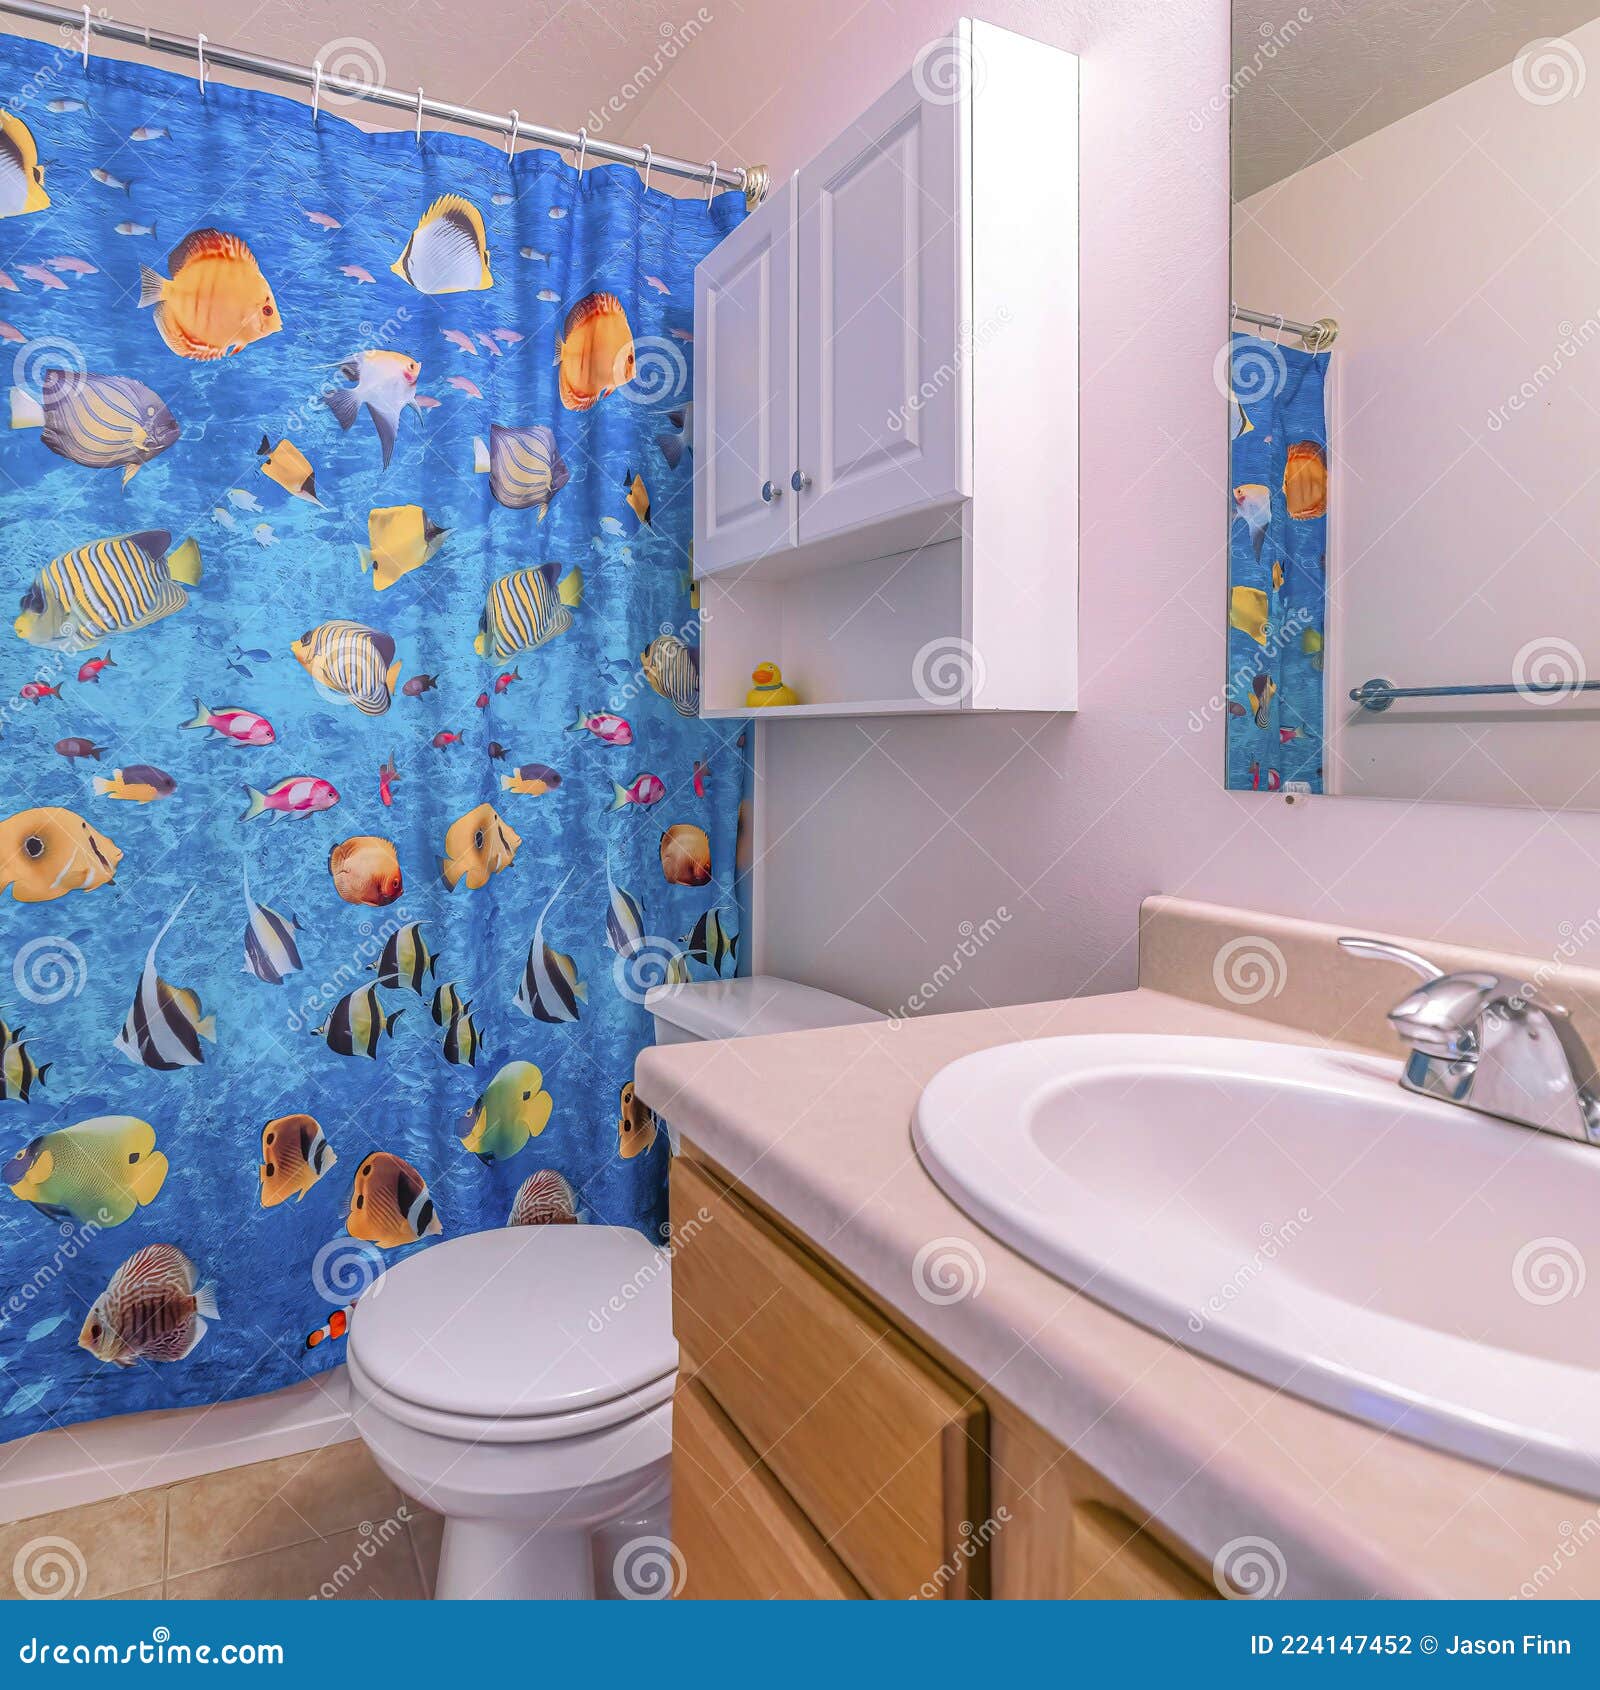 Square Oval sink and wall mirror beside toliet and wall cabinet inside a small bathroom. Vivid blue shower curtain with fish print conceals the bathtub and shower.